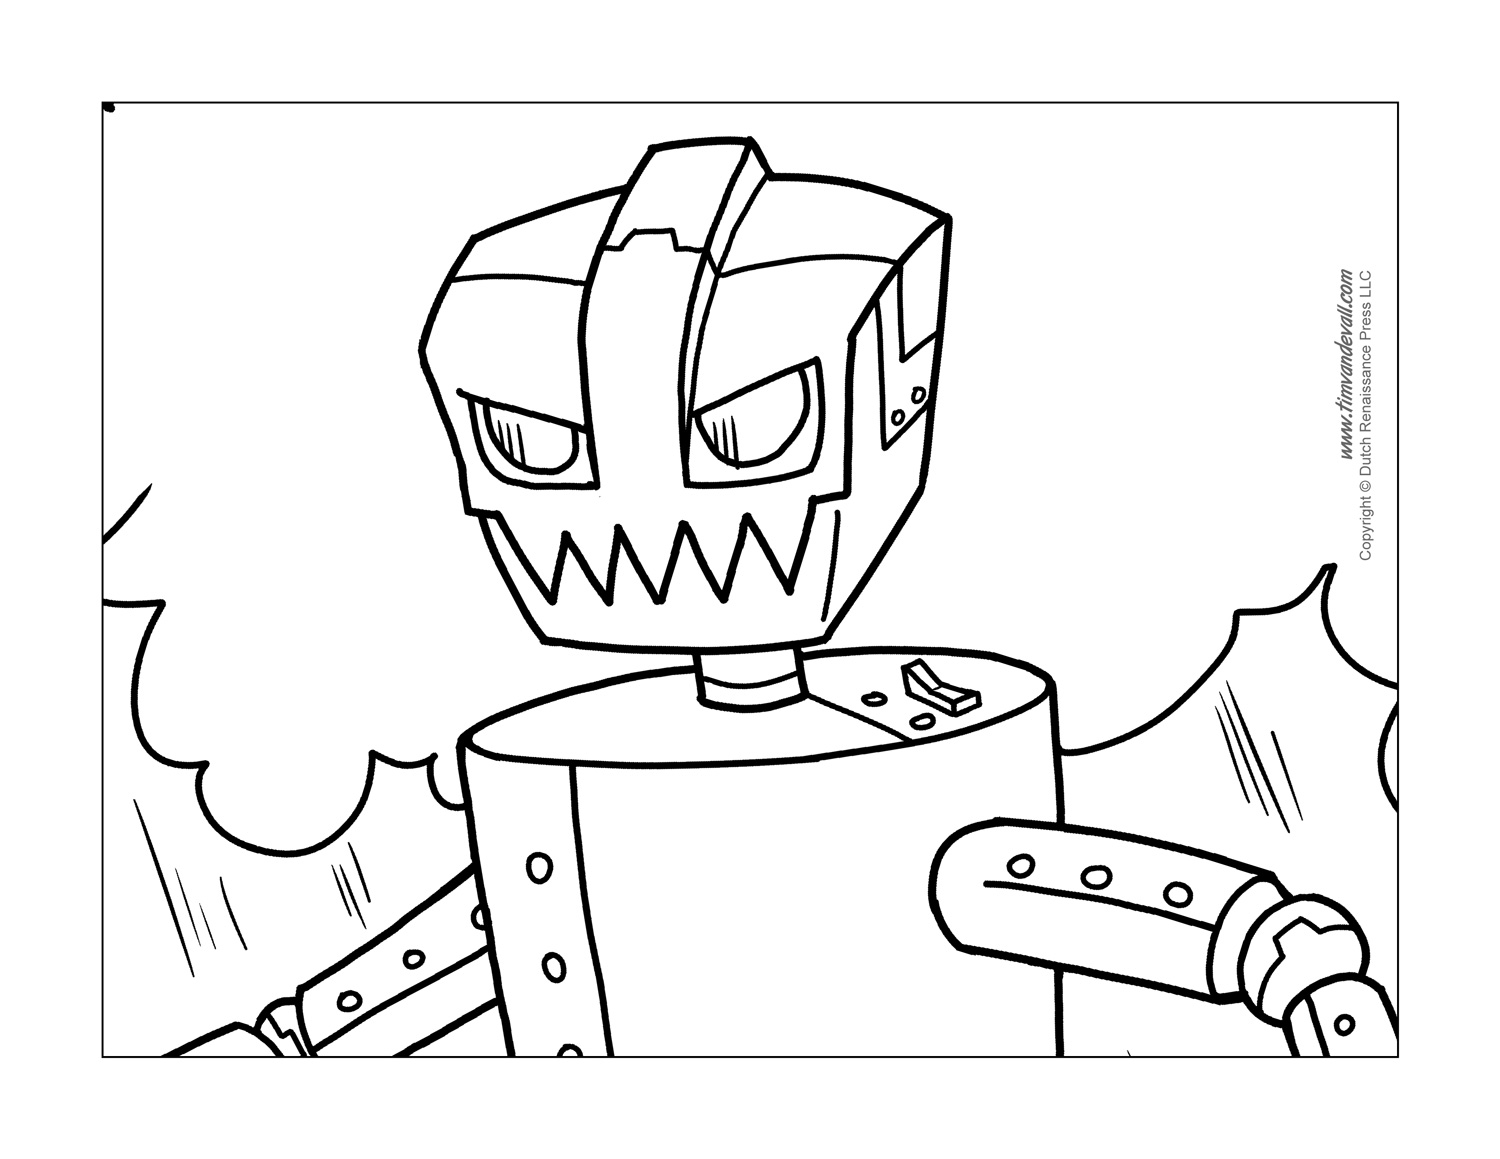 Free robot coloring page â tims printables